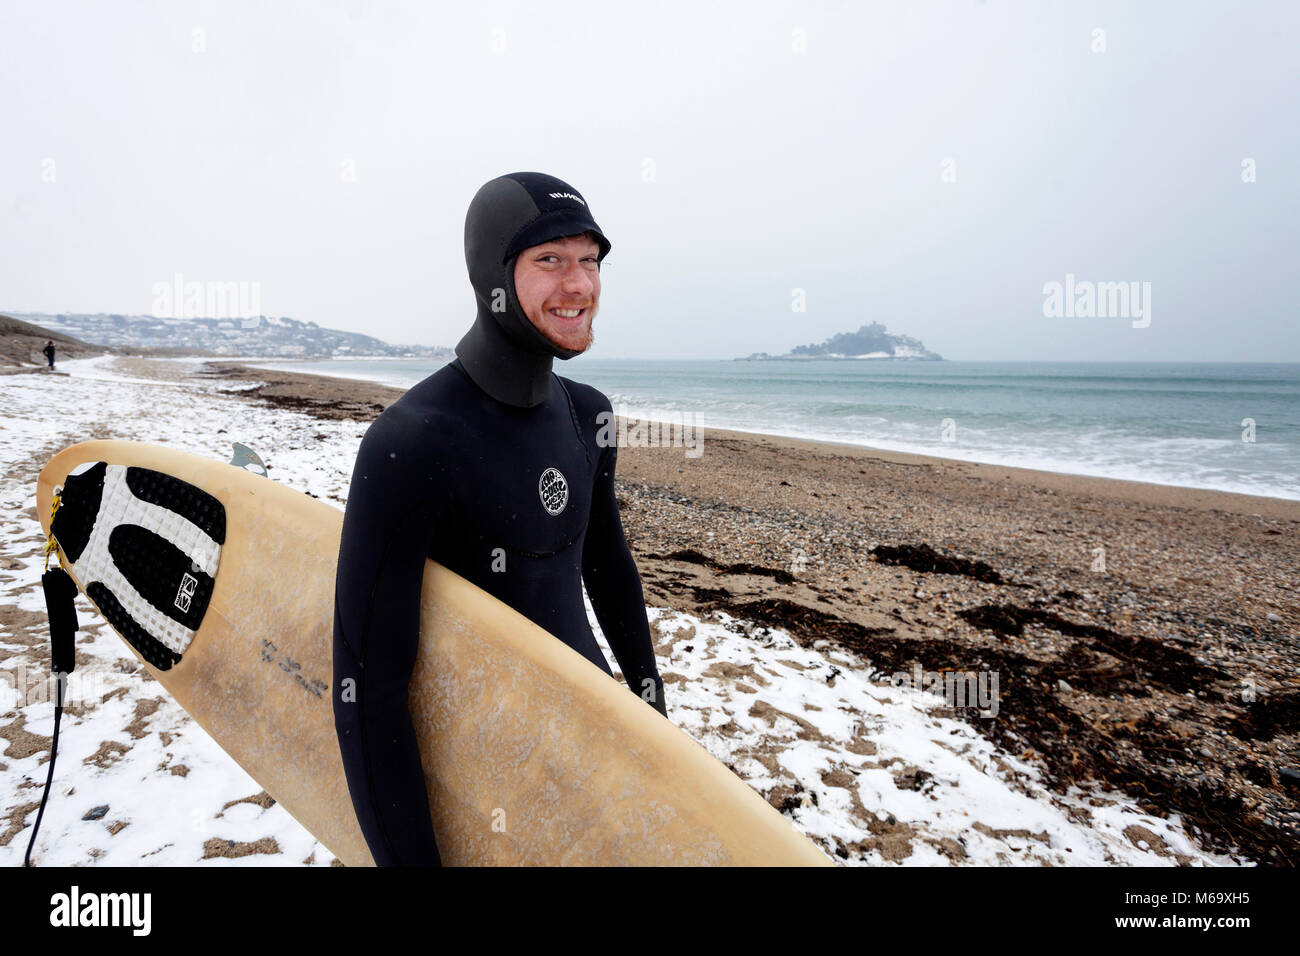 Marazion, Cornwall. 1st Mar, 2018. UK Weather. Marazion, Cornwall UK. 20 year old Brad Morris goes for a sub-zero surf at St Michael's Mount, Marazion, during the Beast from the East phenomenon.  Credit Mike Newman/AlamyLiveNews Stock Photo